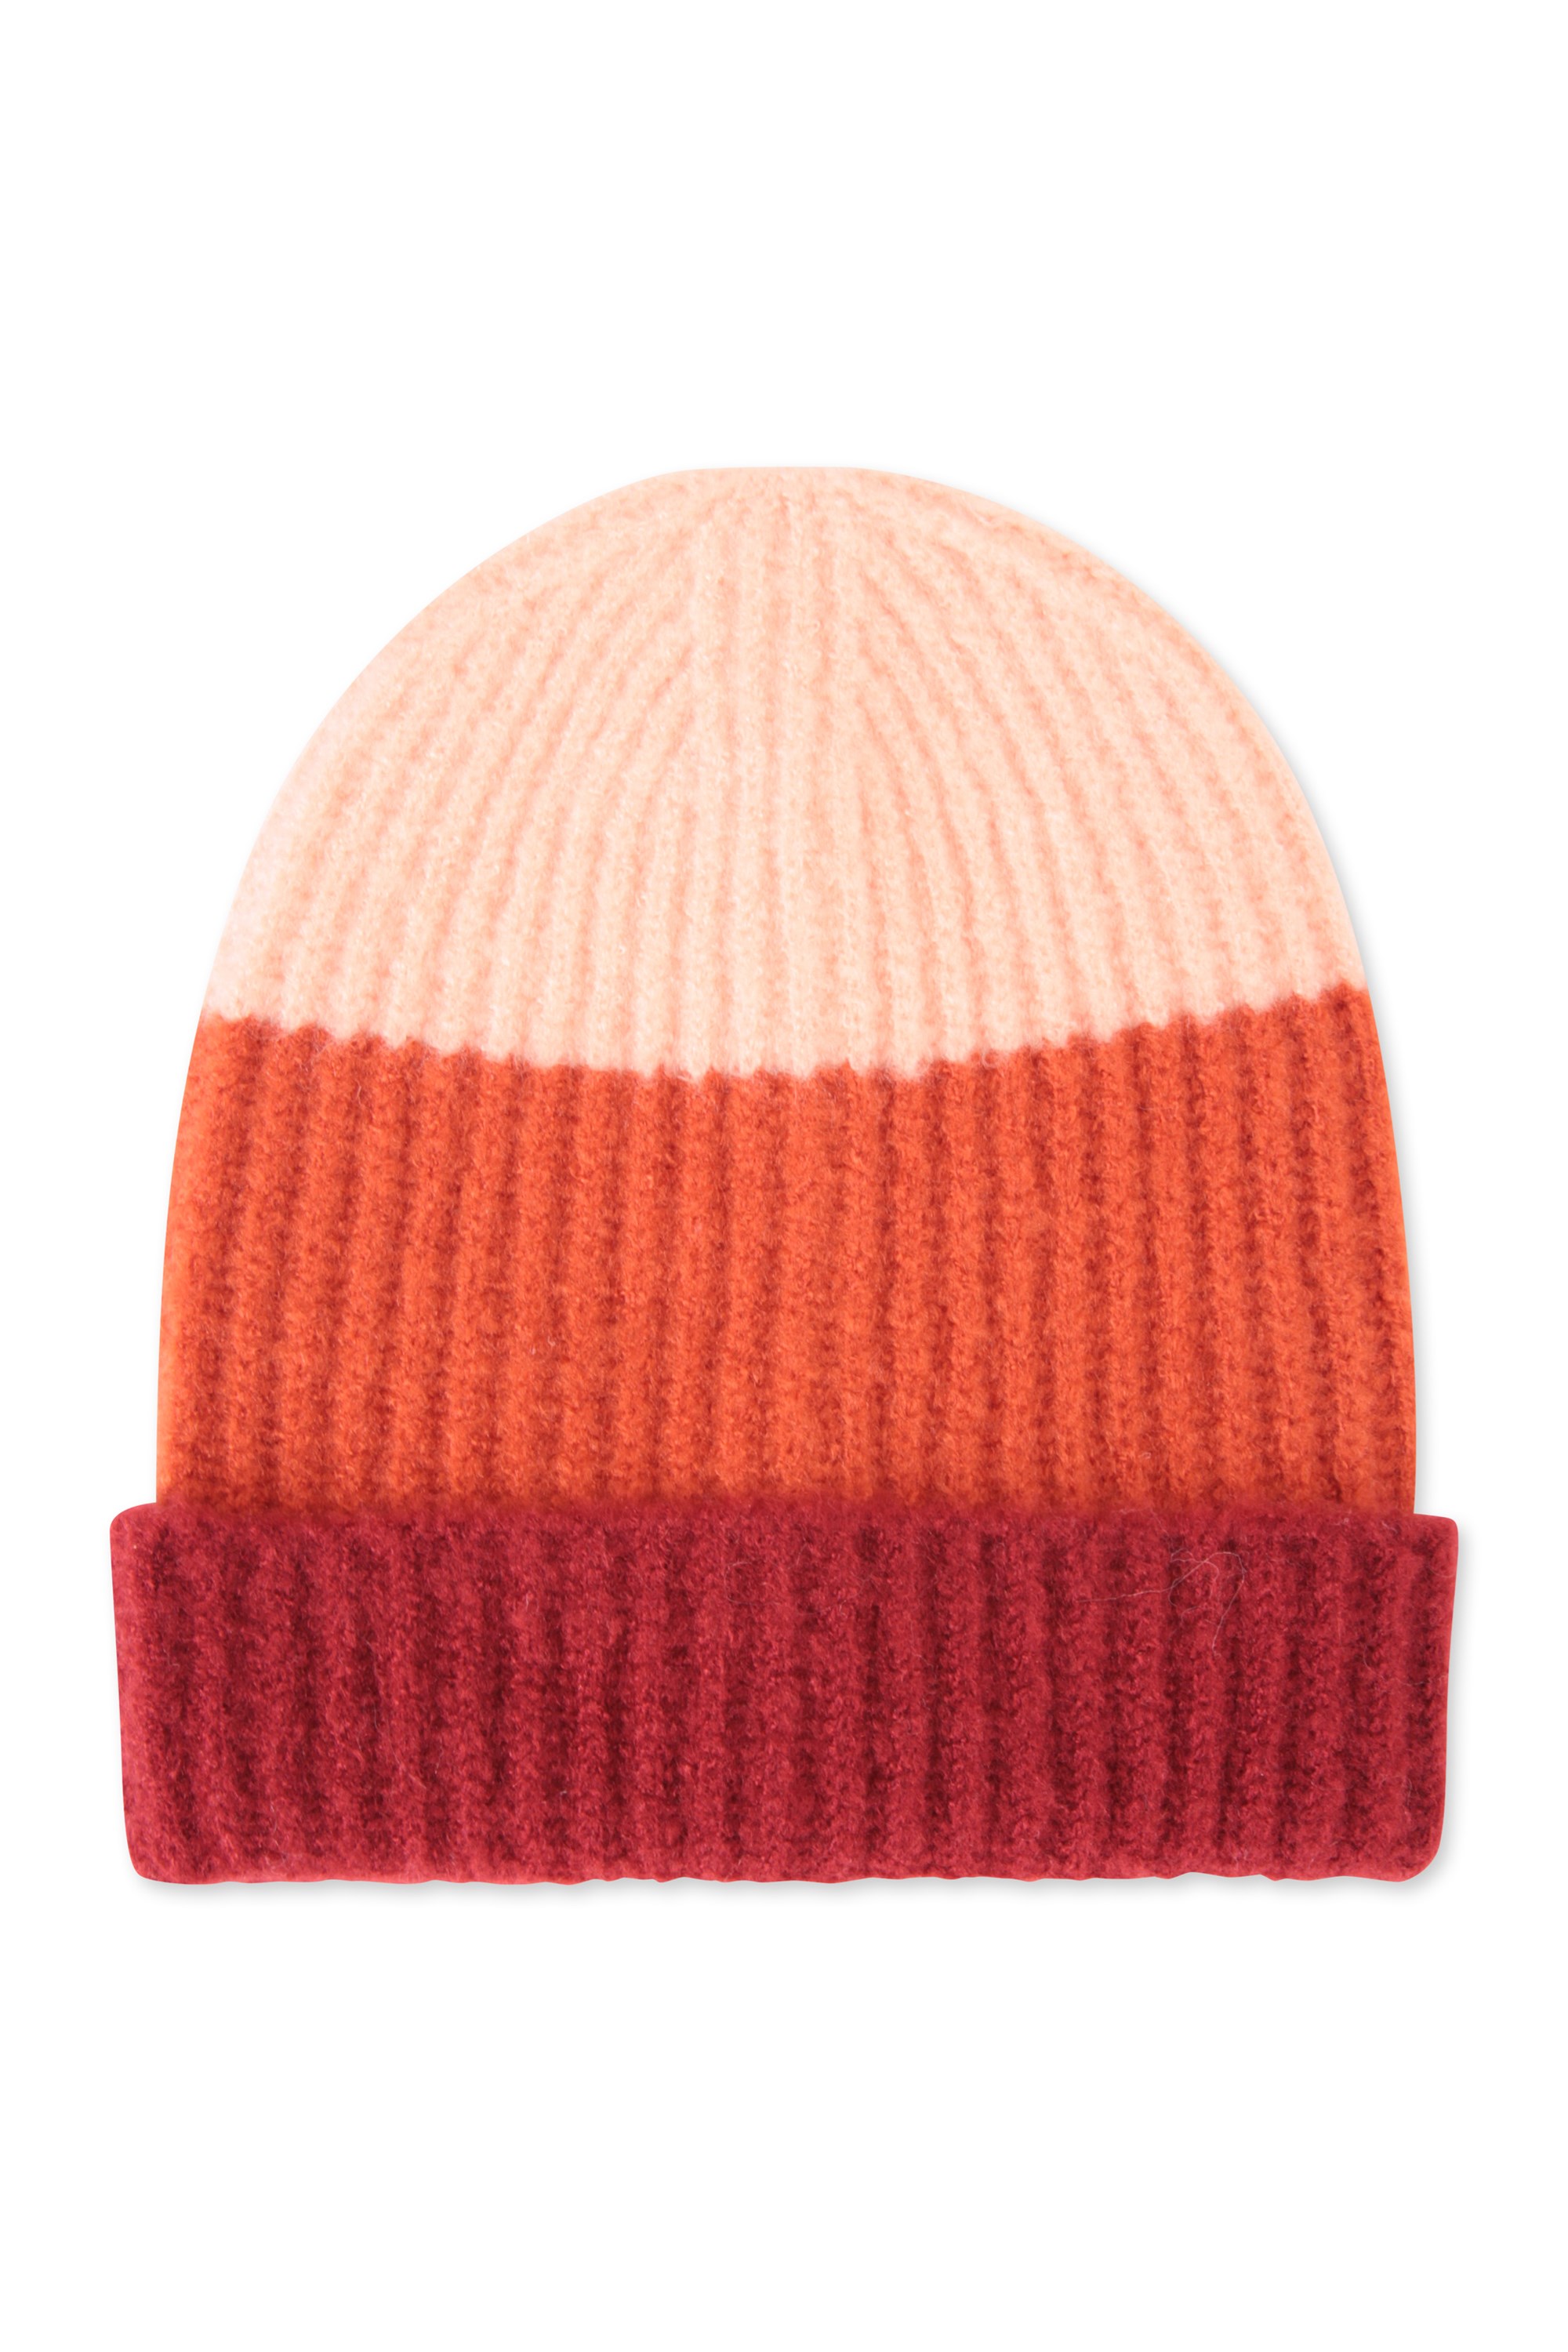 Neon Sheep Chunky Knit Striped Beanie - Red